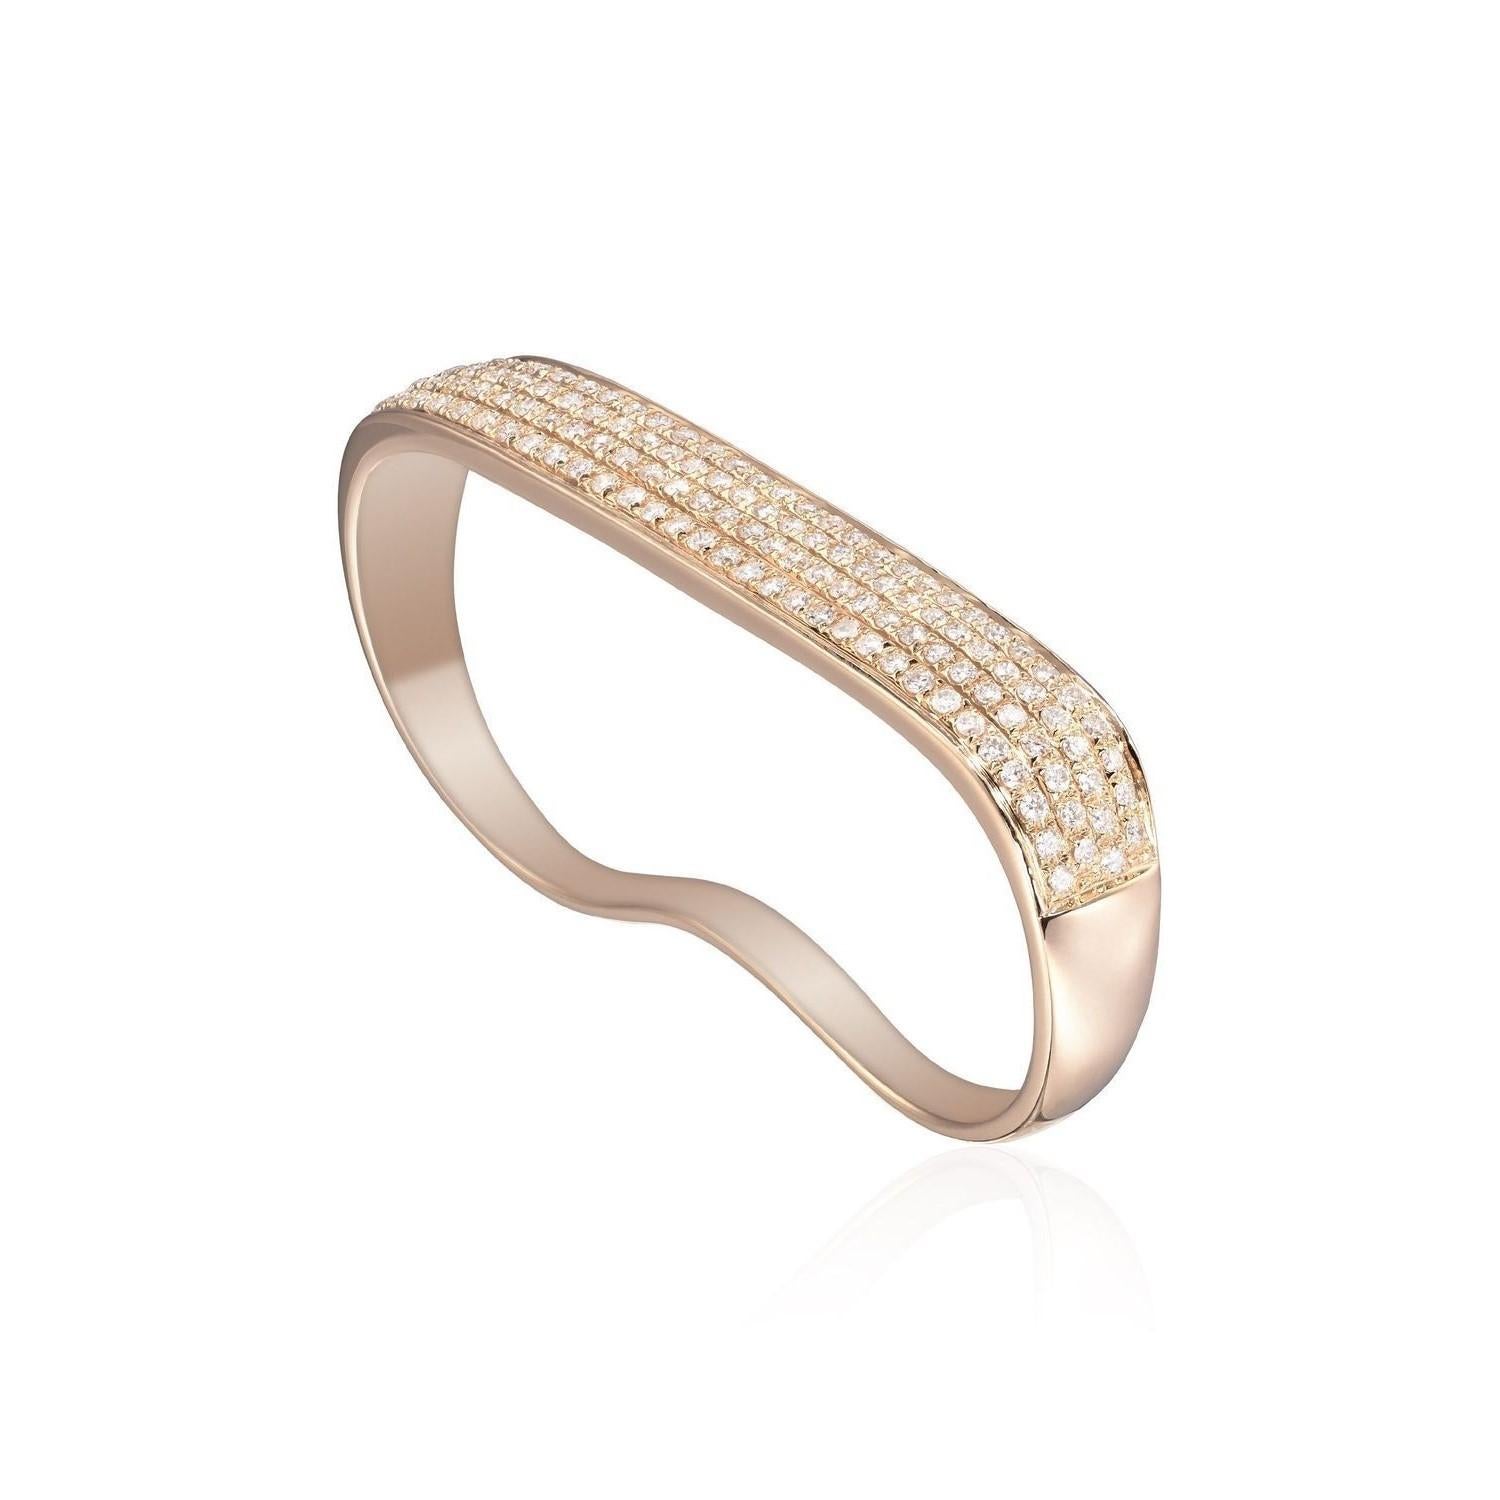 AS29
This statement 18kt rose gold Lana 2-fingers diamond ring from AS29 is simply striking. 
Total Carat Weight: 0.61 cts.
Size: US 6
